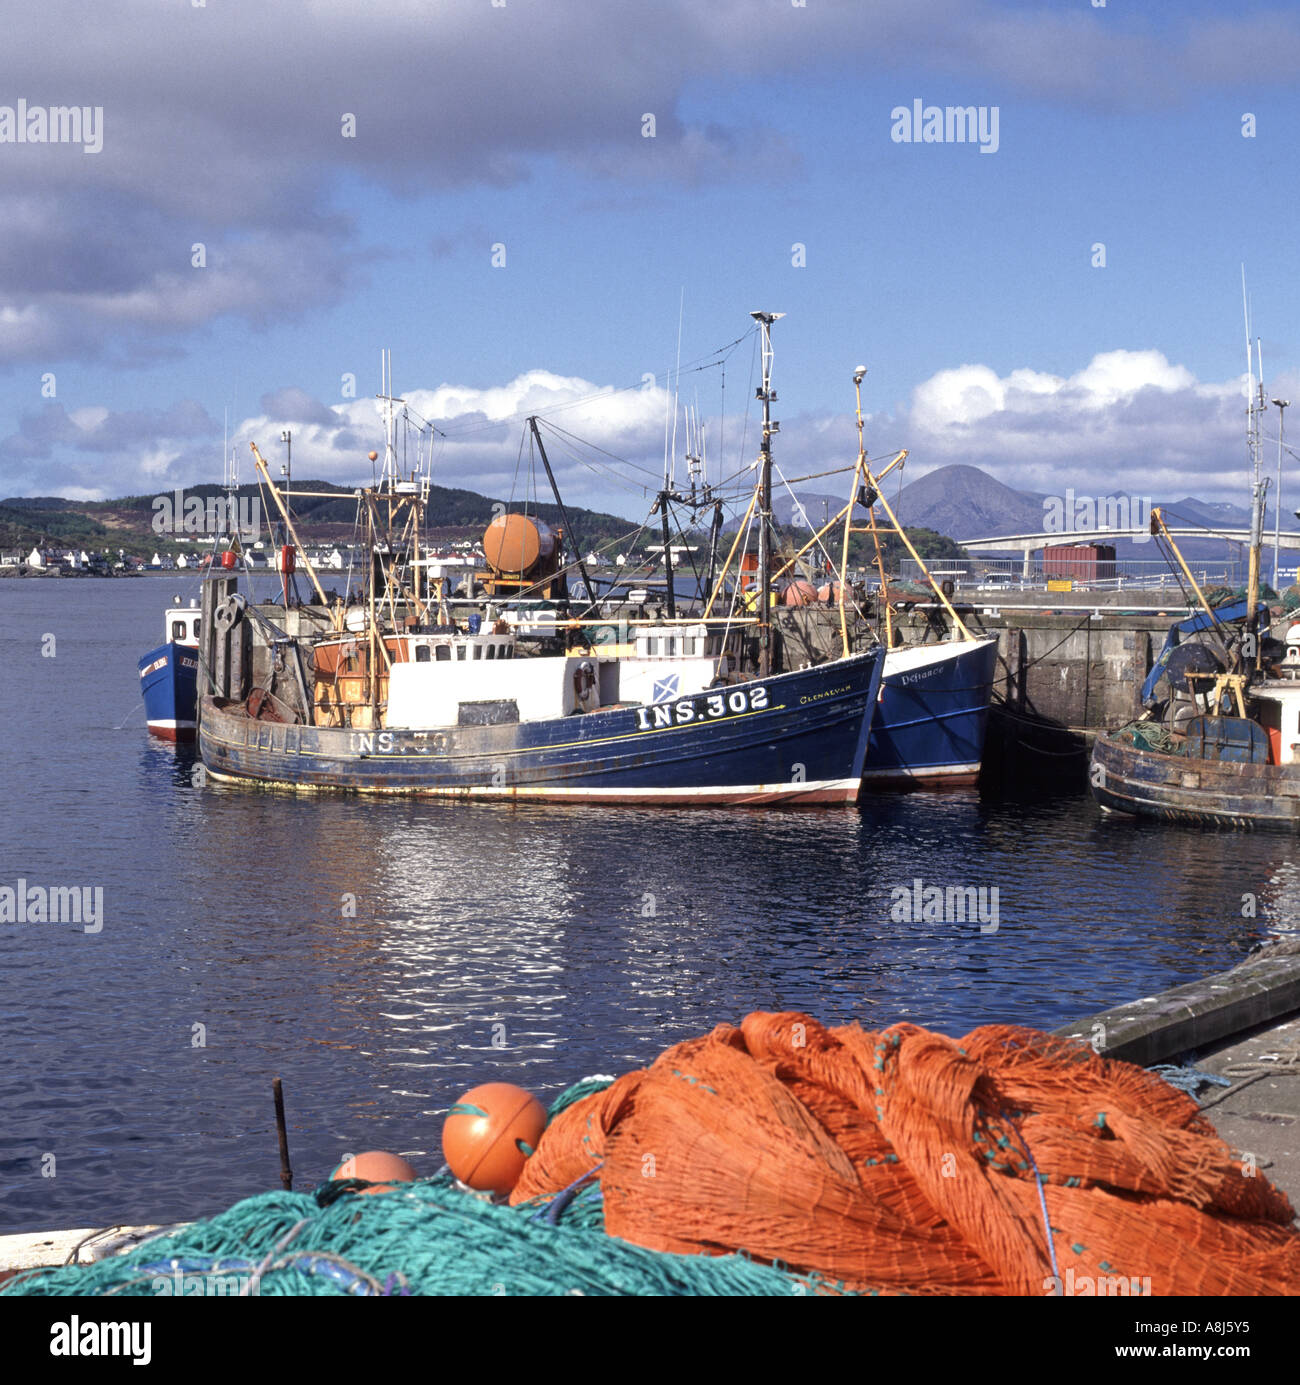 Loch Alsh Kyle Of Lochalsh harbour with fishing boat & nets Kyleakin village & one time toll bridge road on Isle of Skye beyond Highland Scotland UK Stock Photo